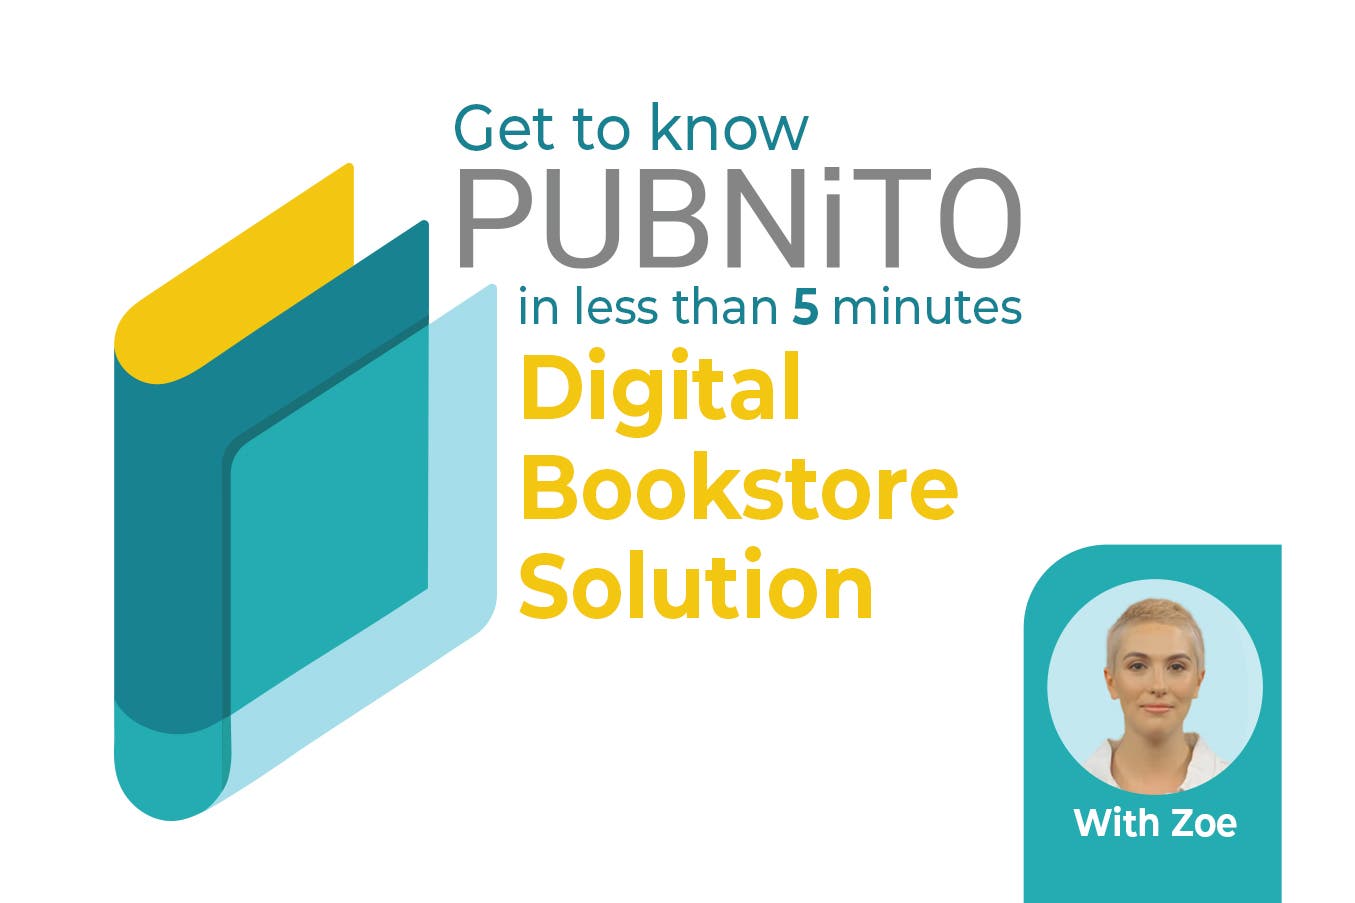 Get to know PUBNiTO - Digital Bookstore Solution